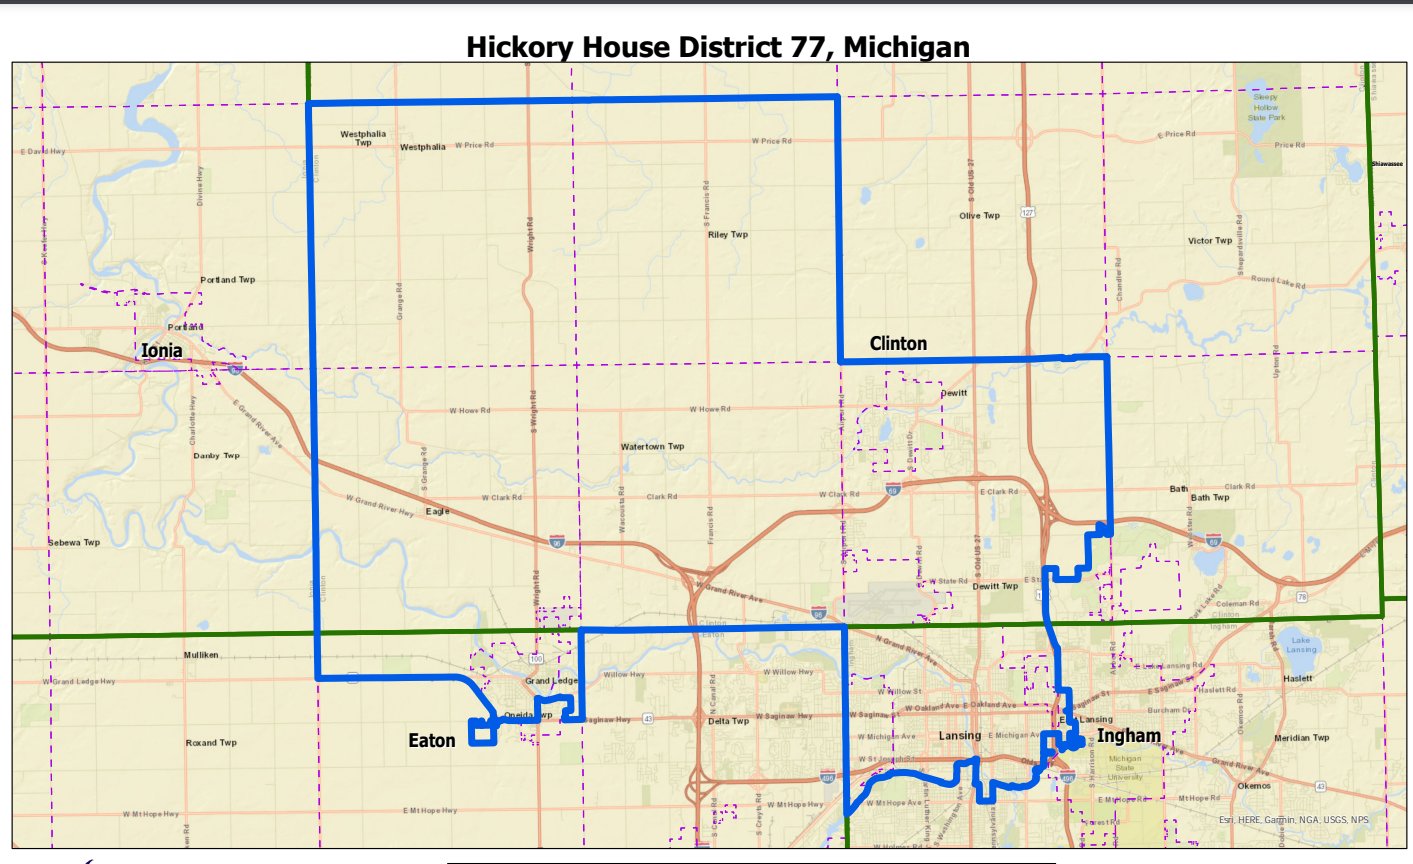 Michigan's 77th House District. The district is outlined in blue, while the green lines are county lines. In all, the district includes downtown Lansing north into Clinton County and a small area of Eaton County including Grand Ledge.